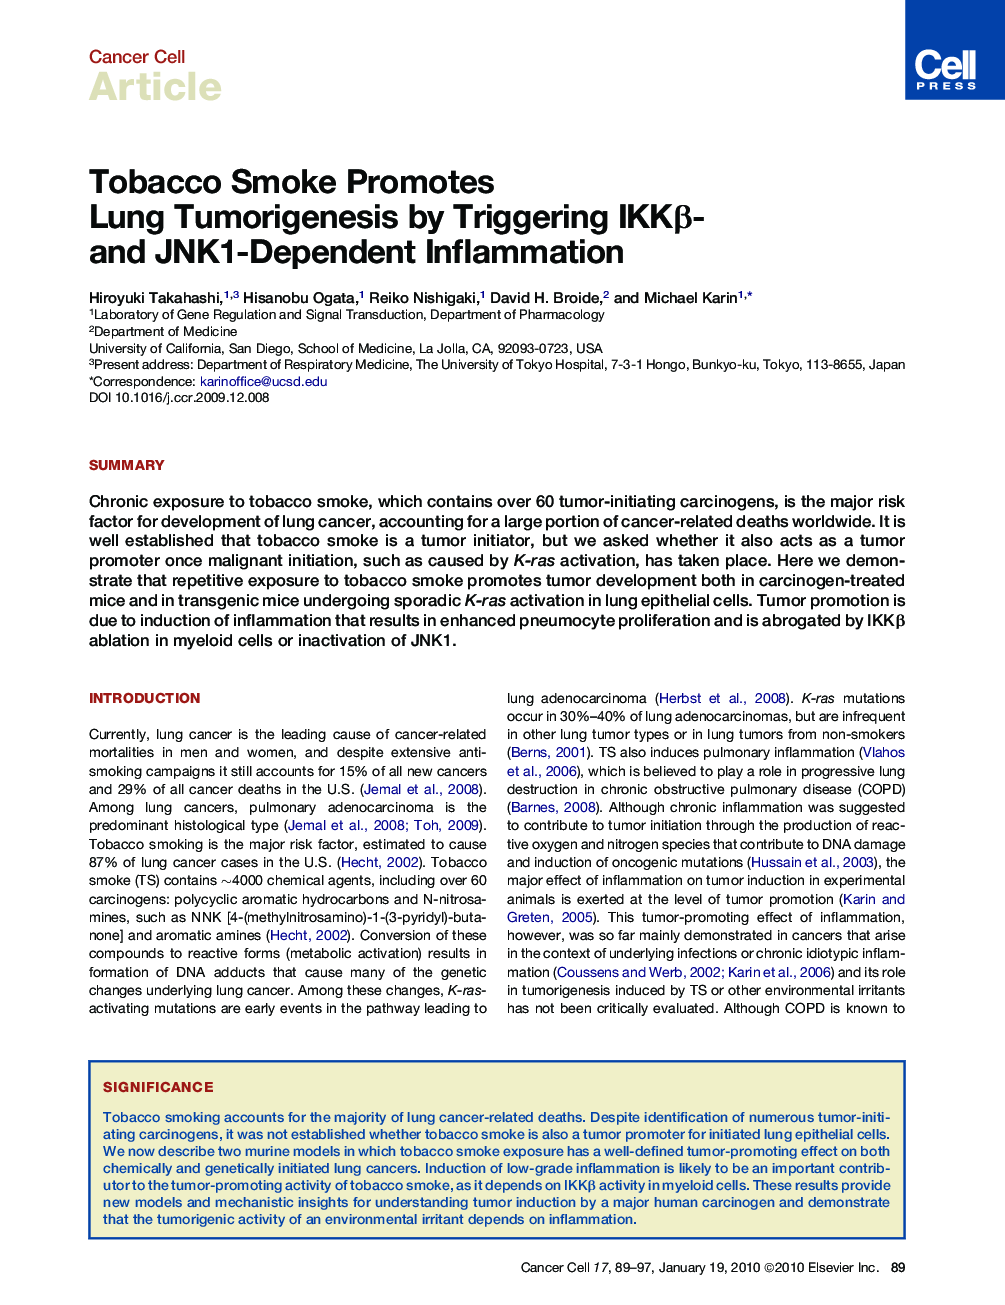 Tobacco Smoke Promotes Lung Tumorigenesis by Triggering IKKβ- and JNK1-Dependent Inflammation